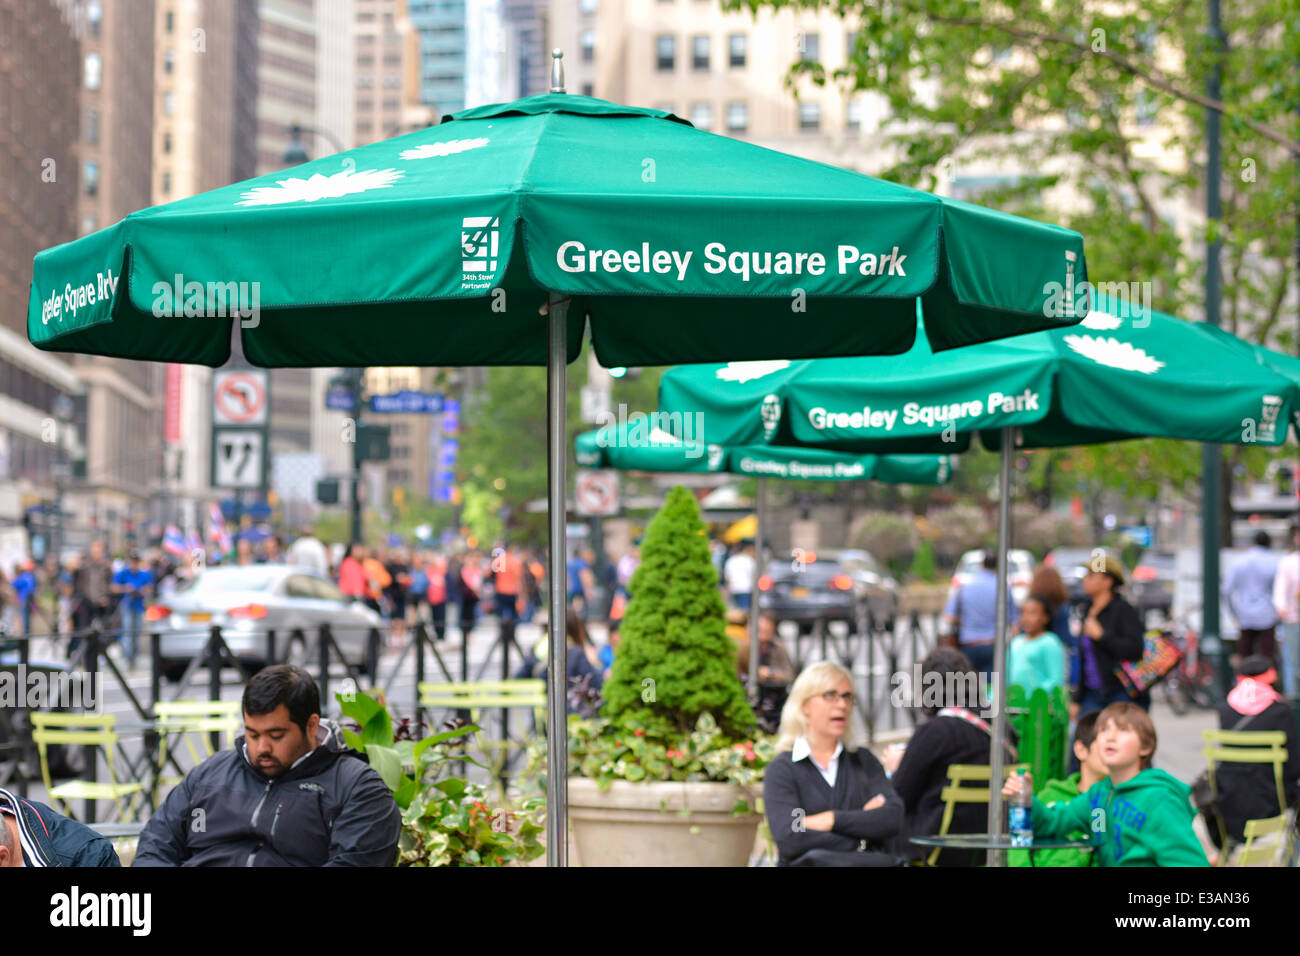 Greeley Square Park Midtown West, New York, NY Banque D'Images